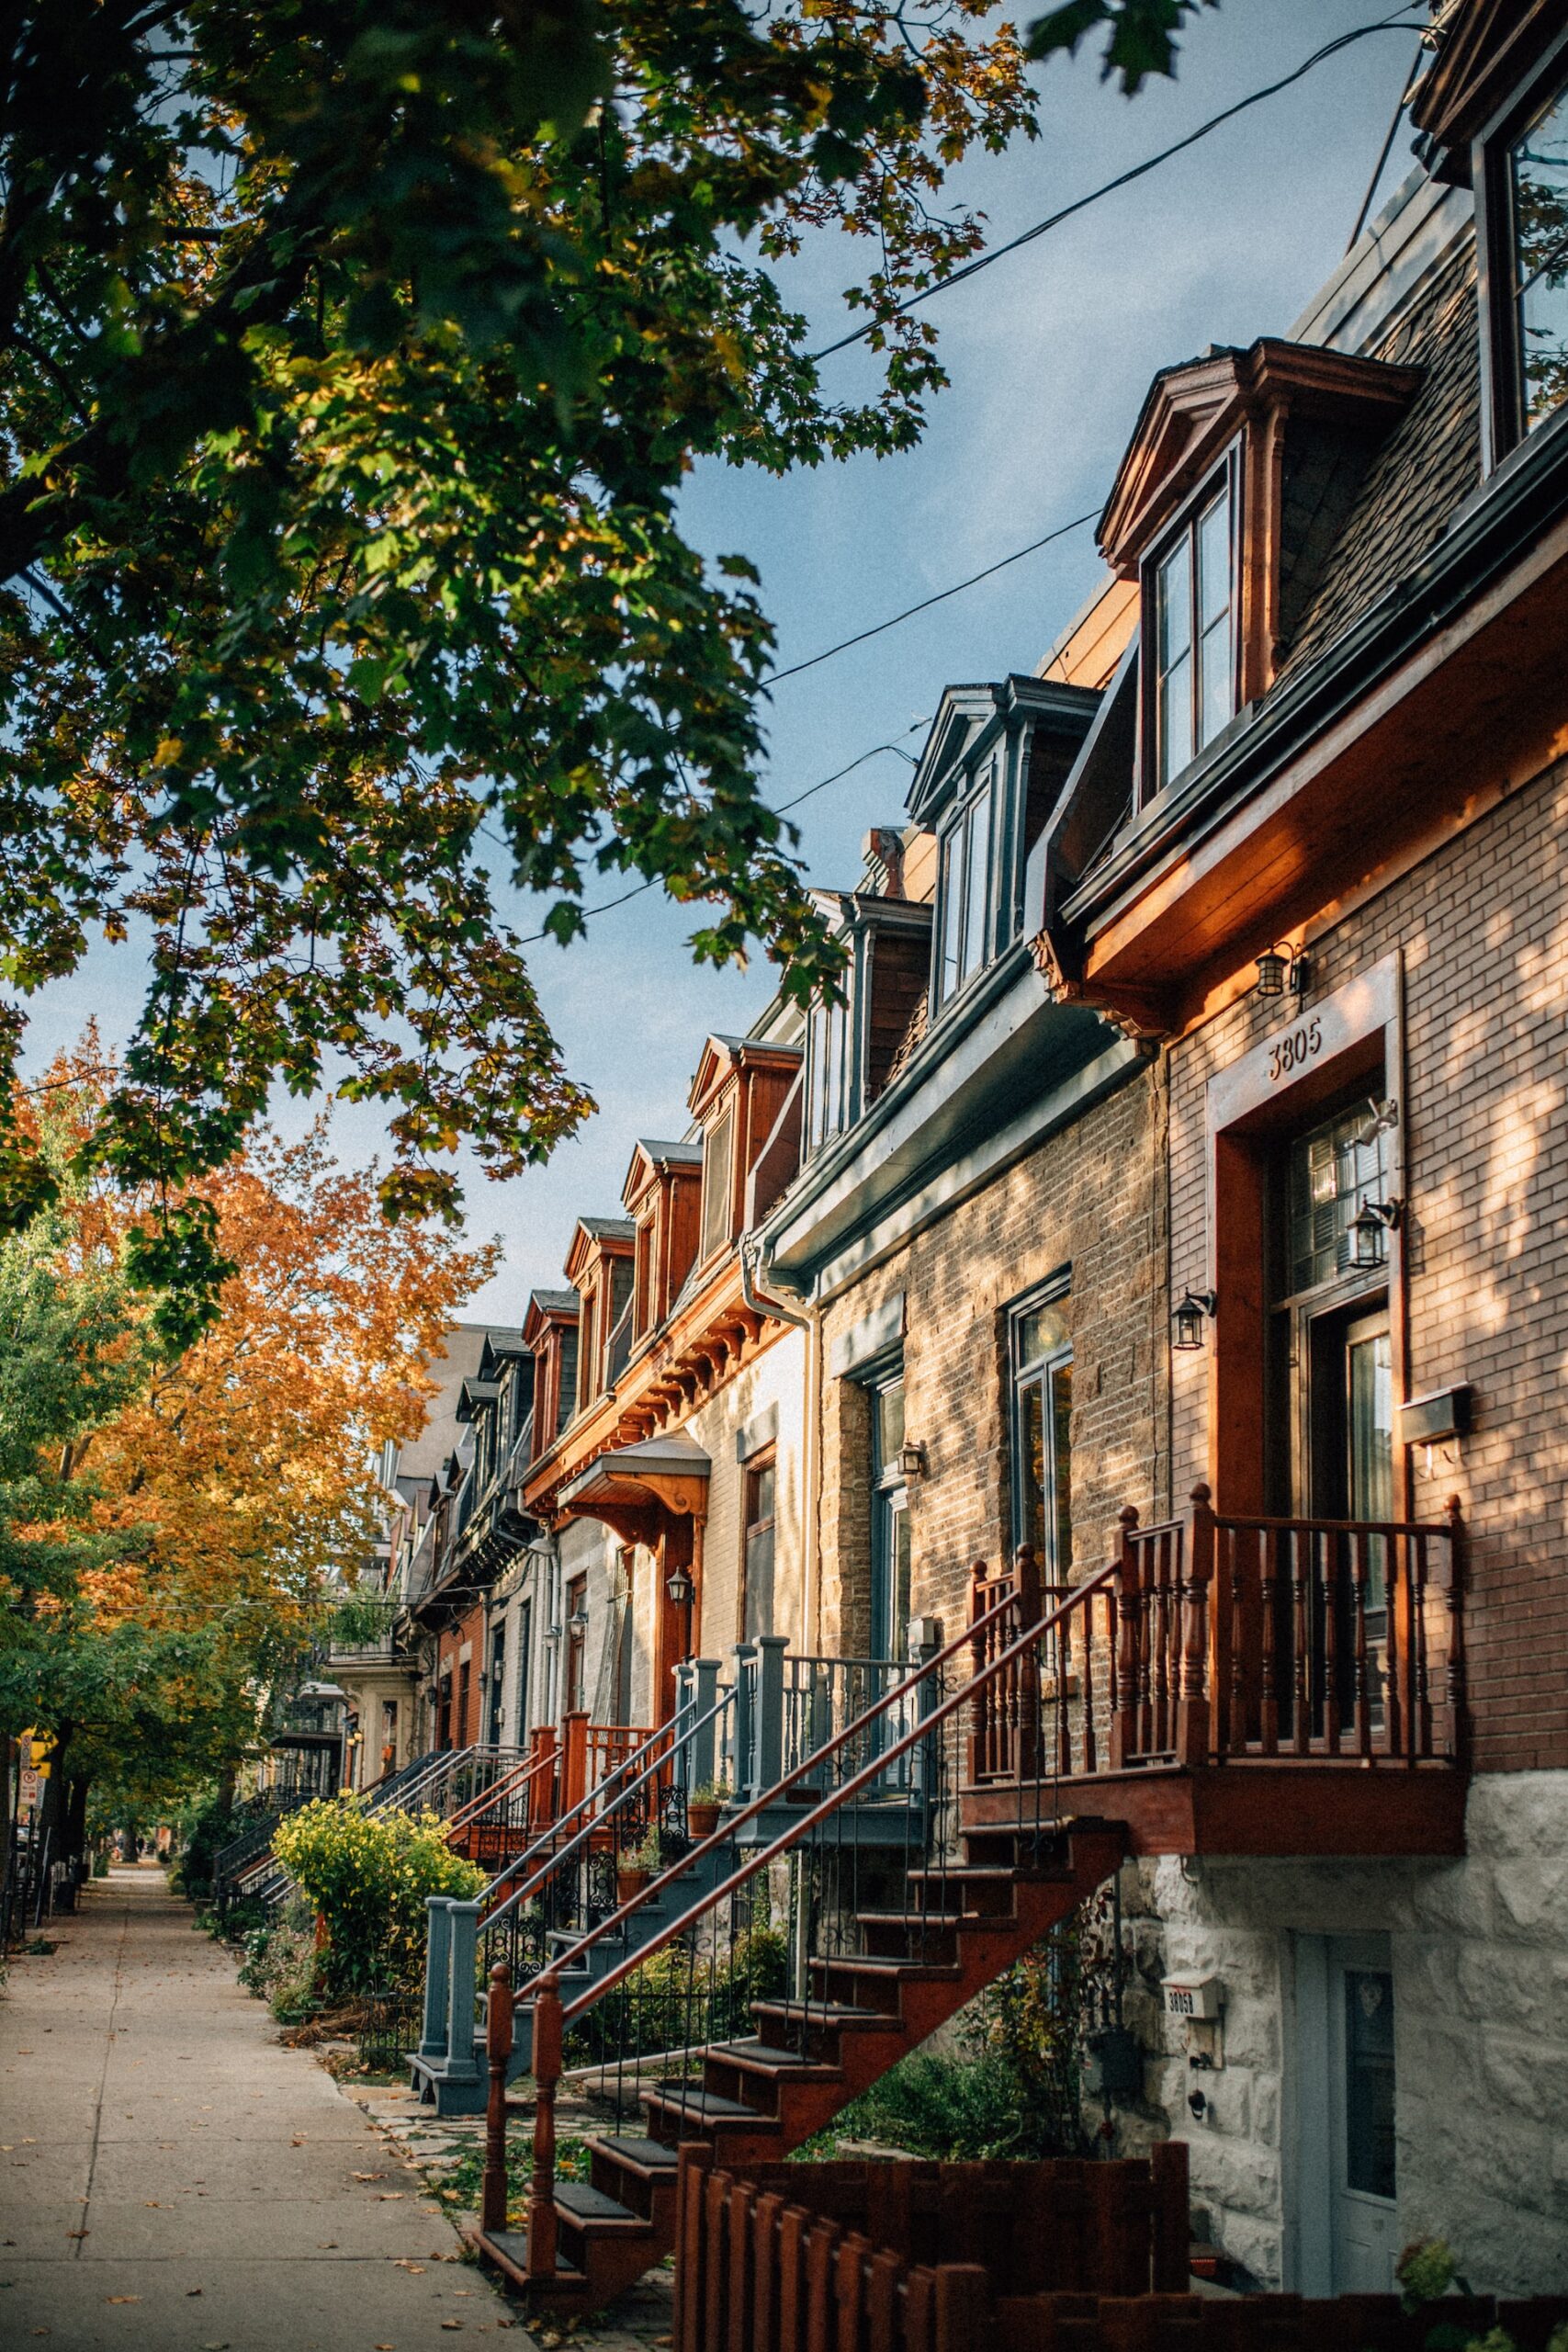 Townhouses in Le Plateau Mount Royal in Montreal, Canada on a beautiful autumn’s day